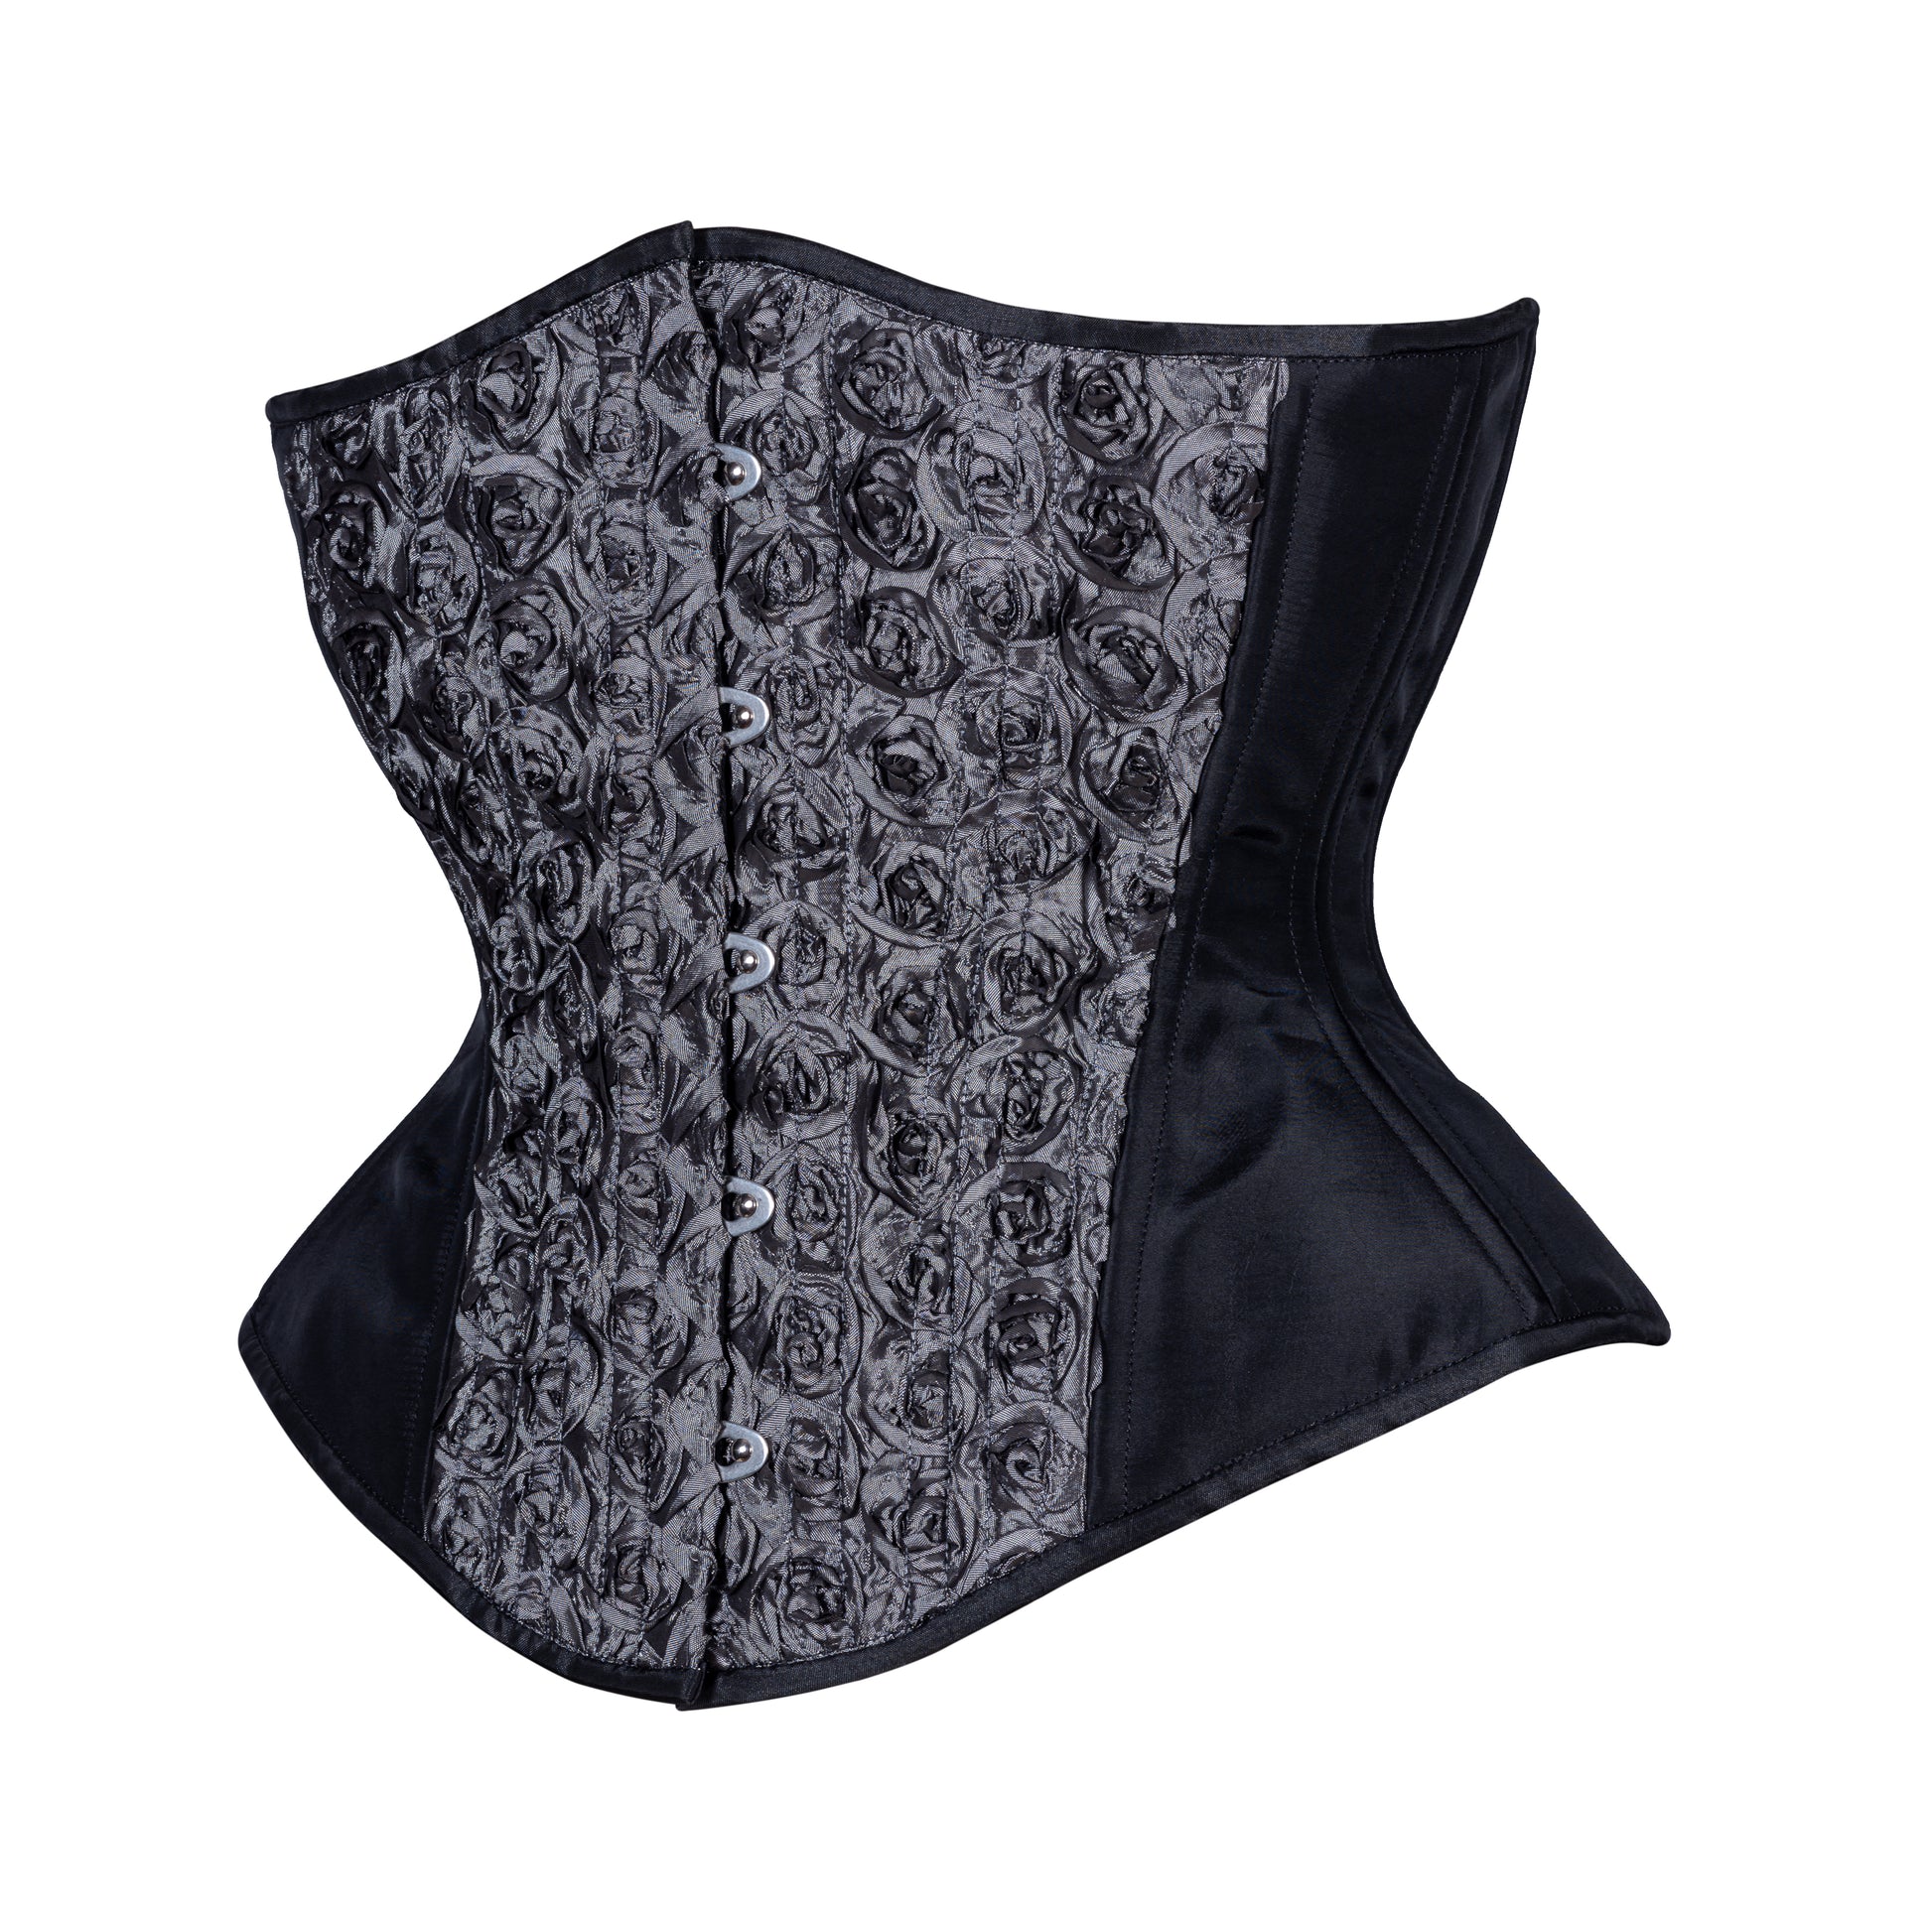 Plum and Gold Brocade Corset, Hourglass Silhouette, Long – Timeless Trends